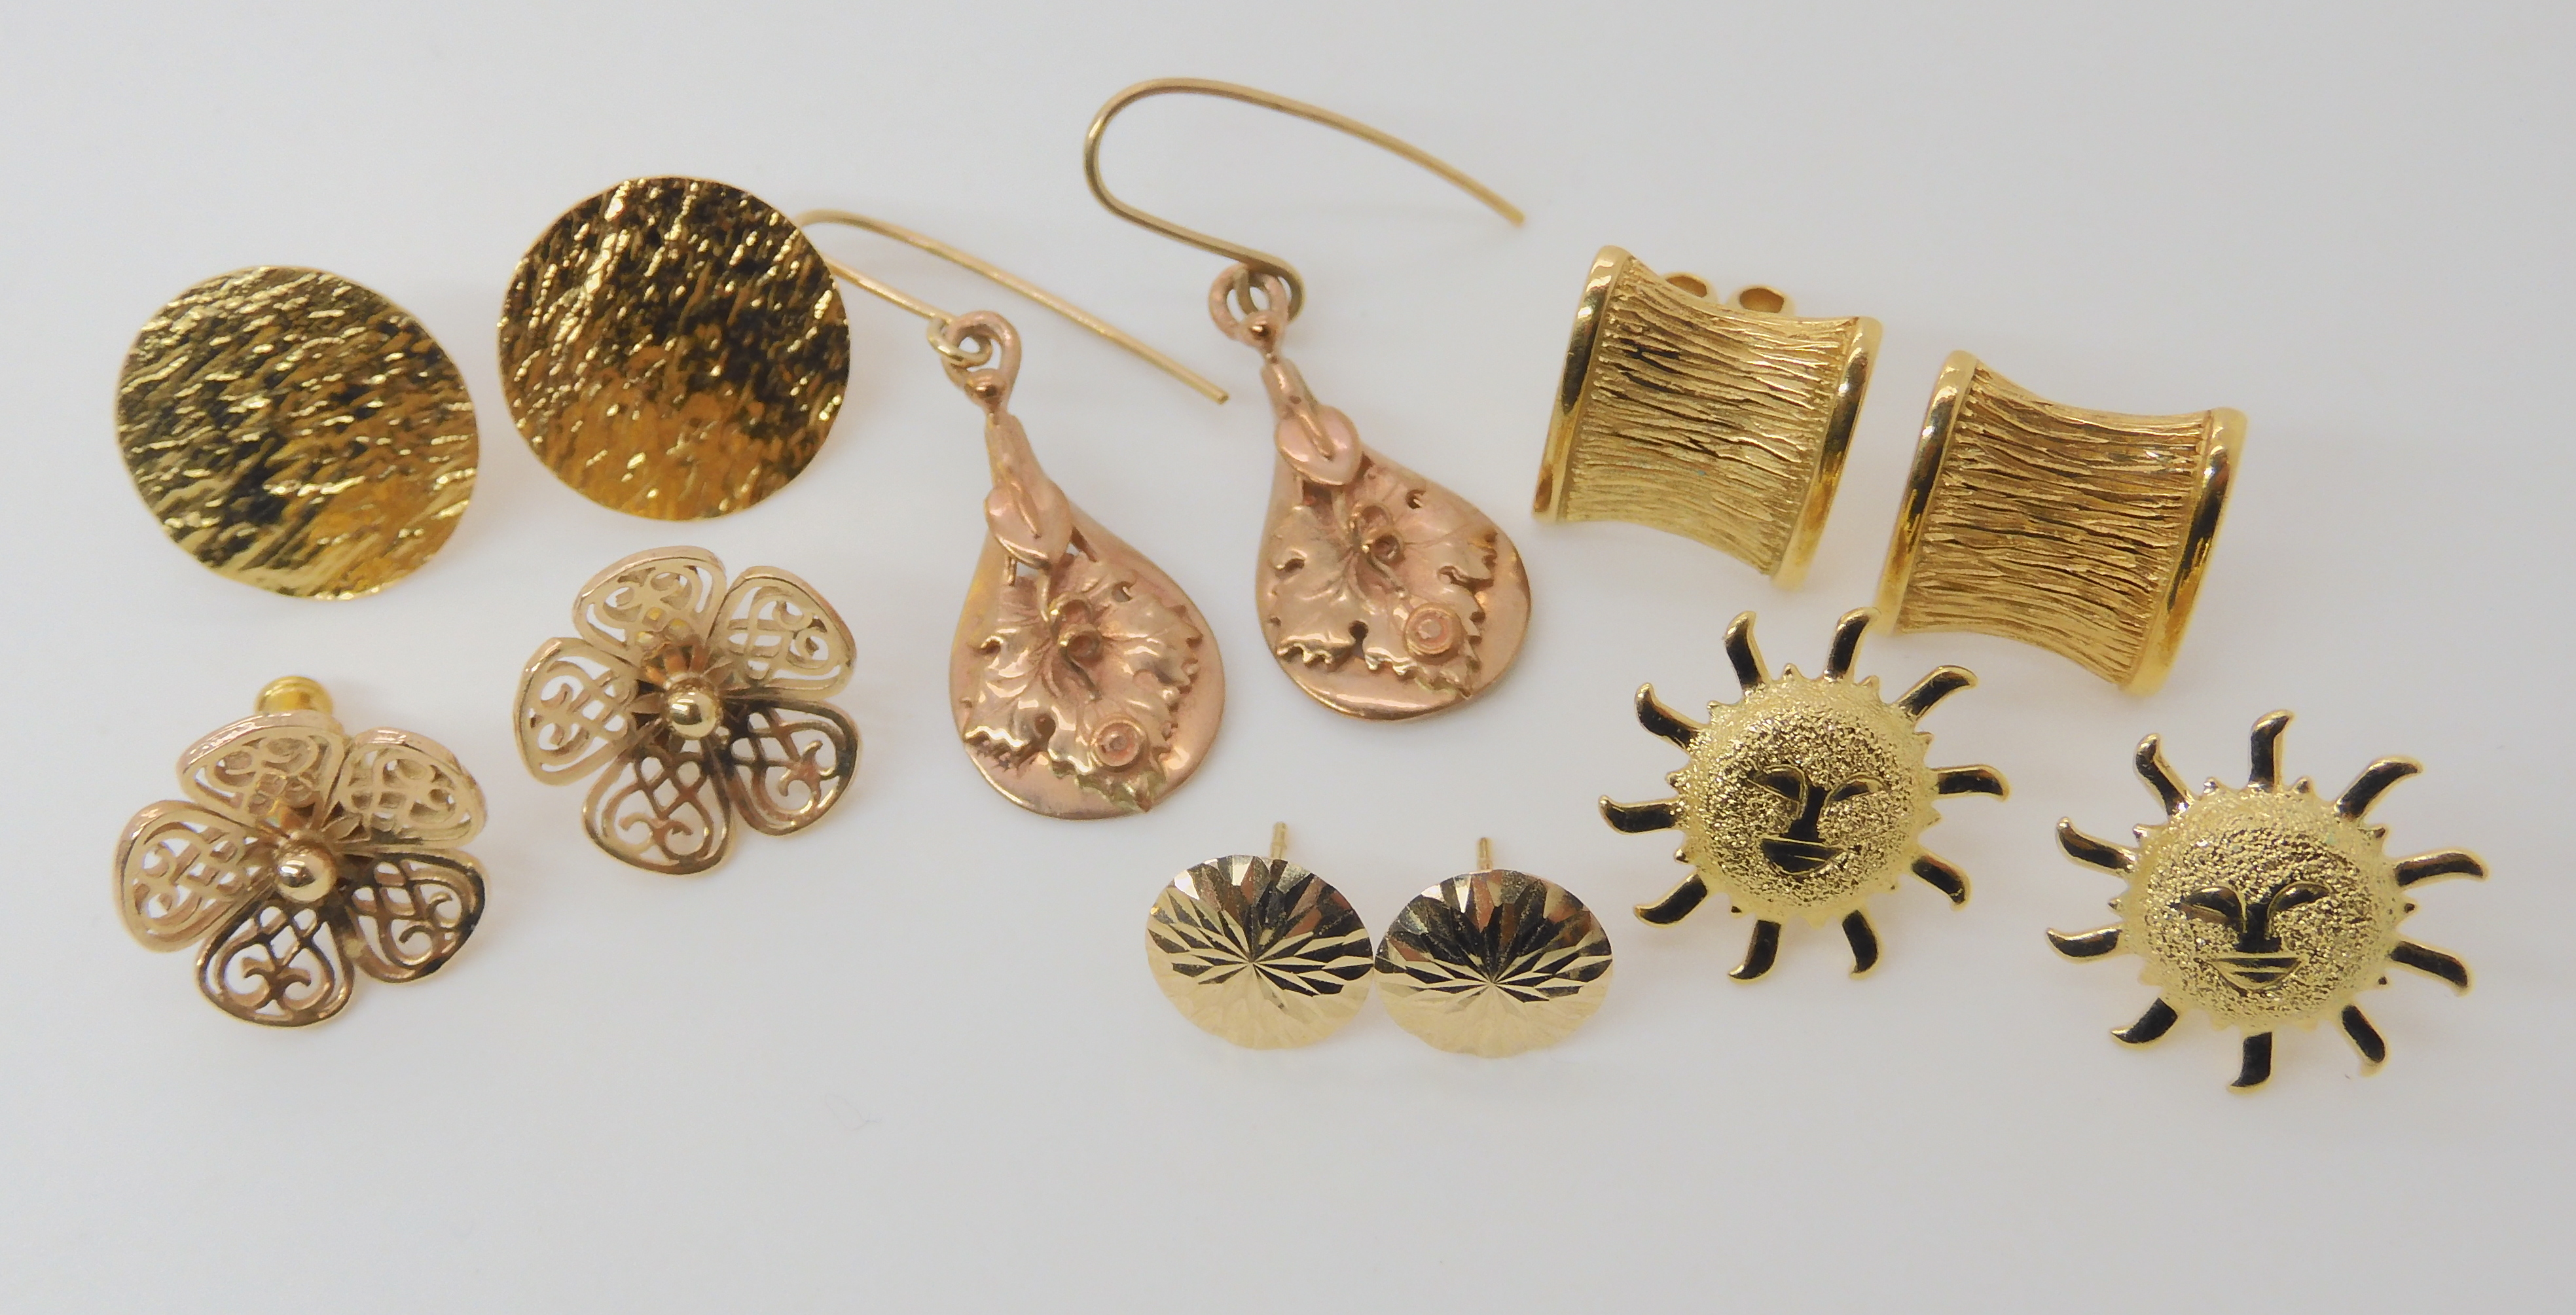 A collection of six pairs of 9ct and yellow metal earrings, approximate weight 14gms Condition